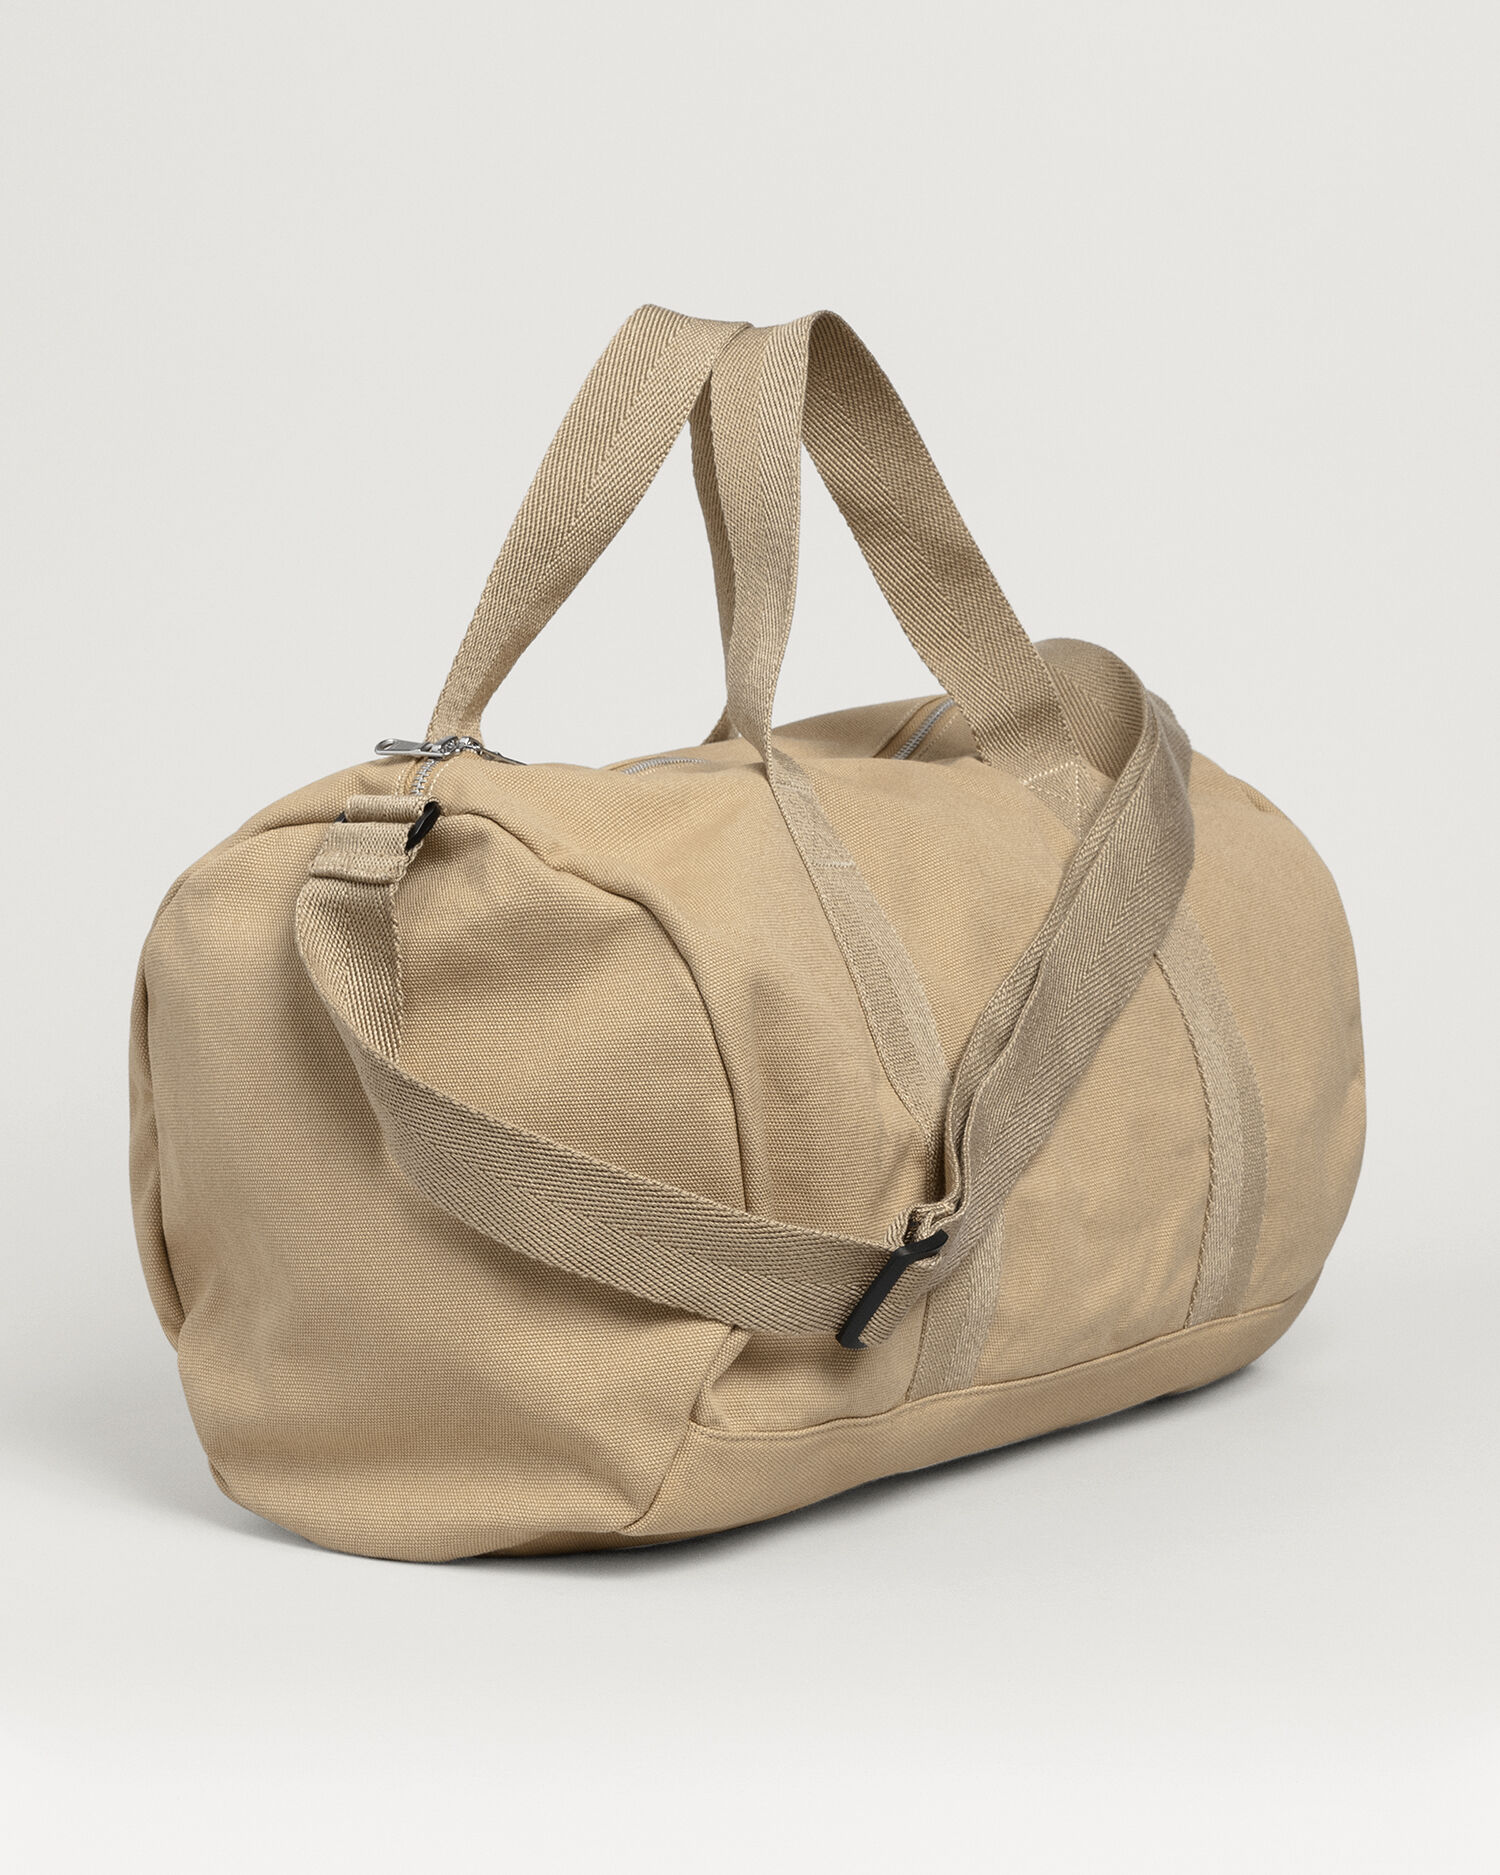 GANT Cotton Archive Shield Duffle Bag in Natural for Men Mens Bags Gym bags and sports bags 